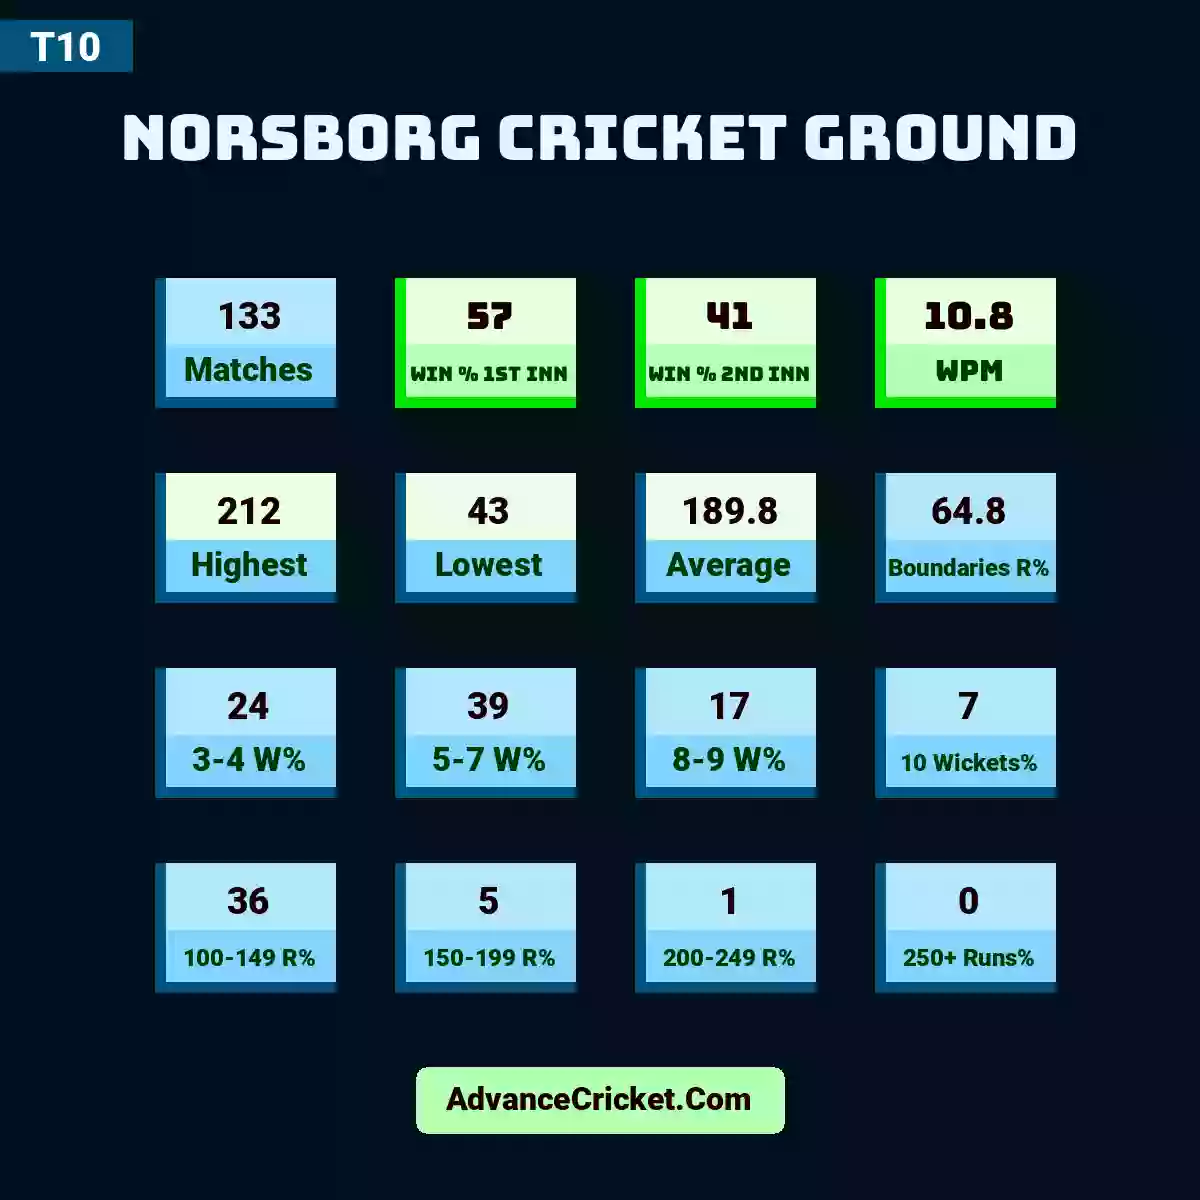 Image showing Norsborg Cricket Ground with Matches: 133, Win % 1st Inn: 57, Win % 2nd Inn: 41, WPM: 10.8, Highest: 212, Lowest: 43, Average: 189.8, Boundaries R%: 64.8, 3-4 W%: 24, 5-7 W%: 39, 8-9 W%: 17, 10 Wickets%: 7, 100-149 R%: 36, 150-199 R%: 5, 200-249 R%: 1, 250+ Runs%: 0.